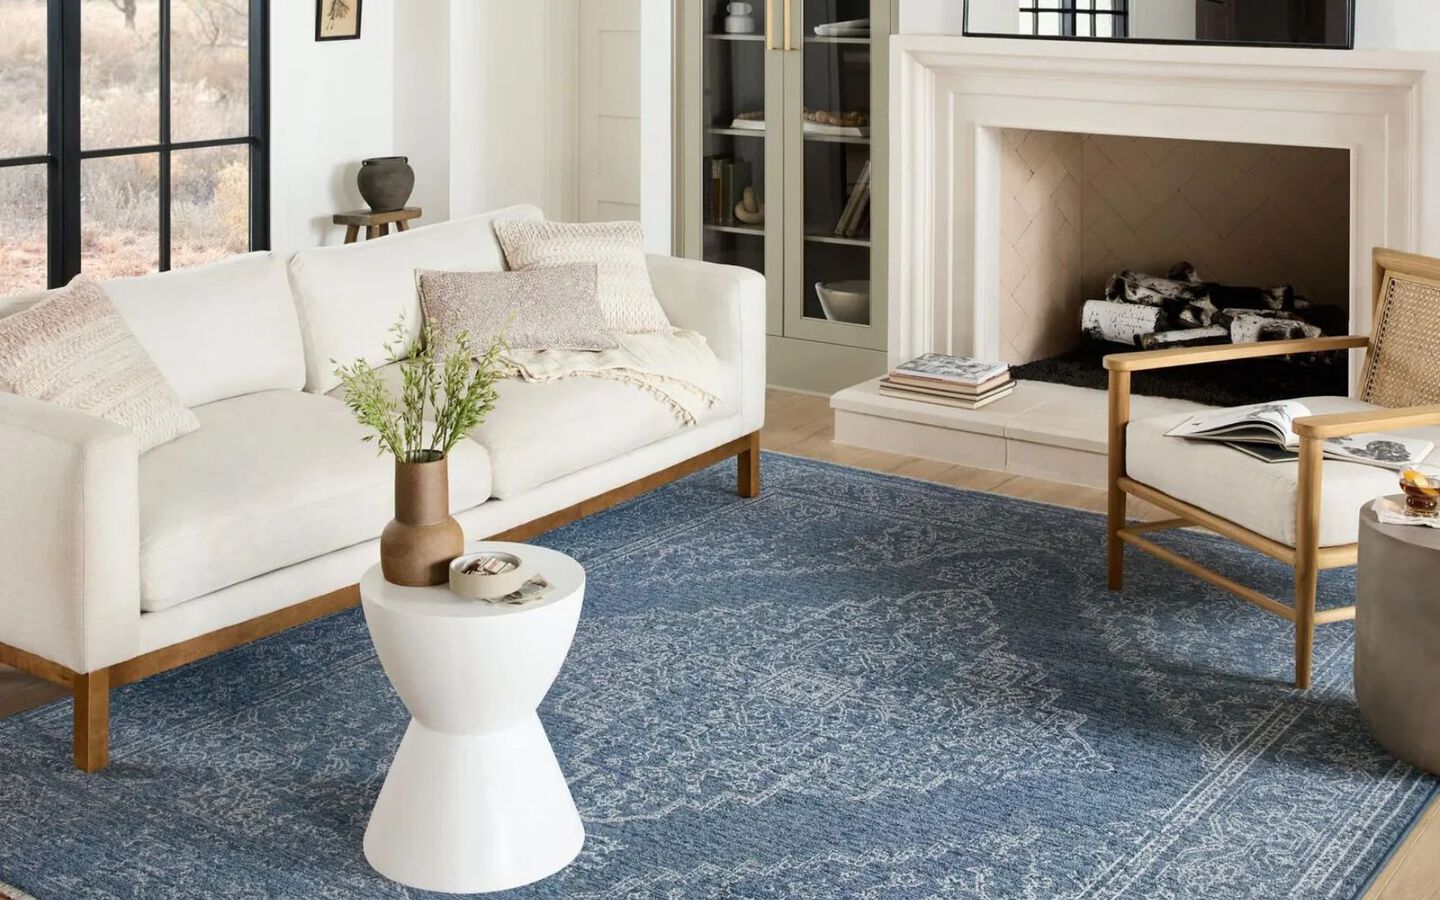 living room with white couch, white side table, and a blue patterned rug